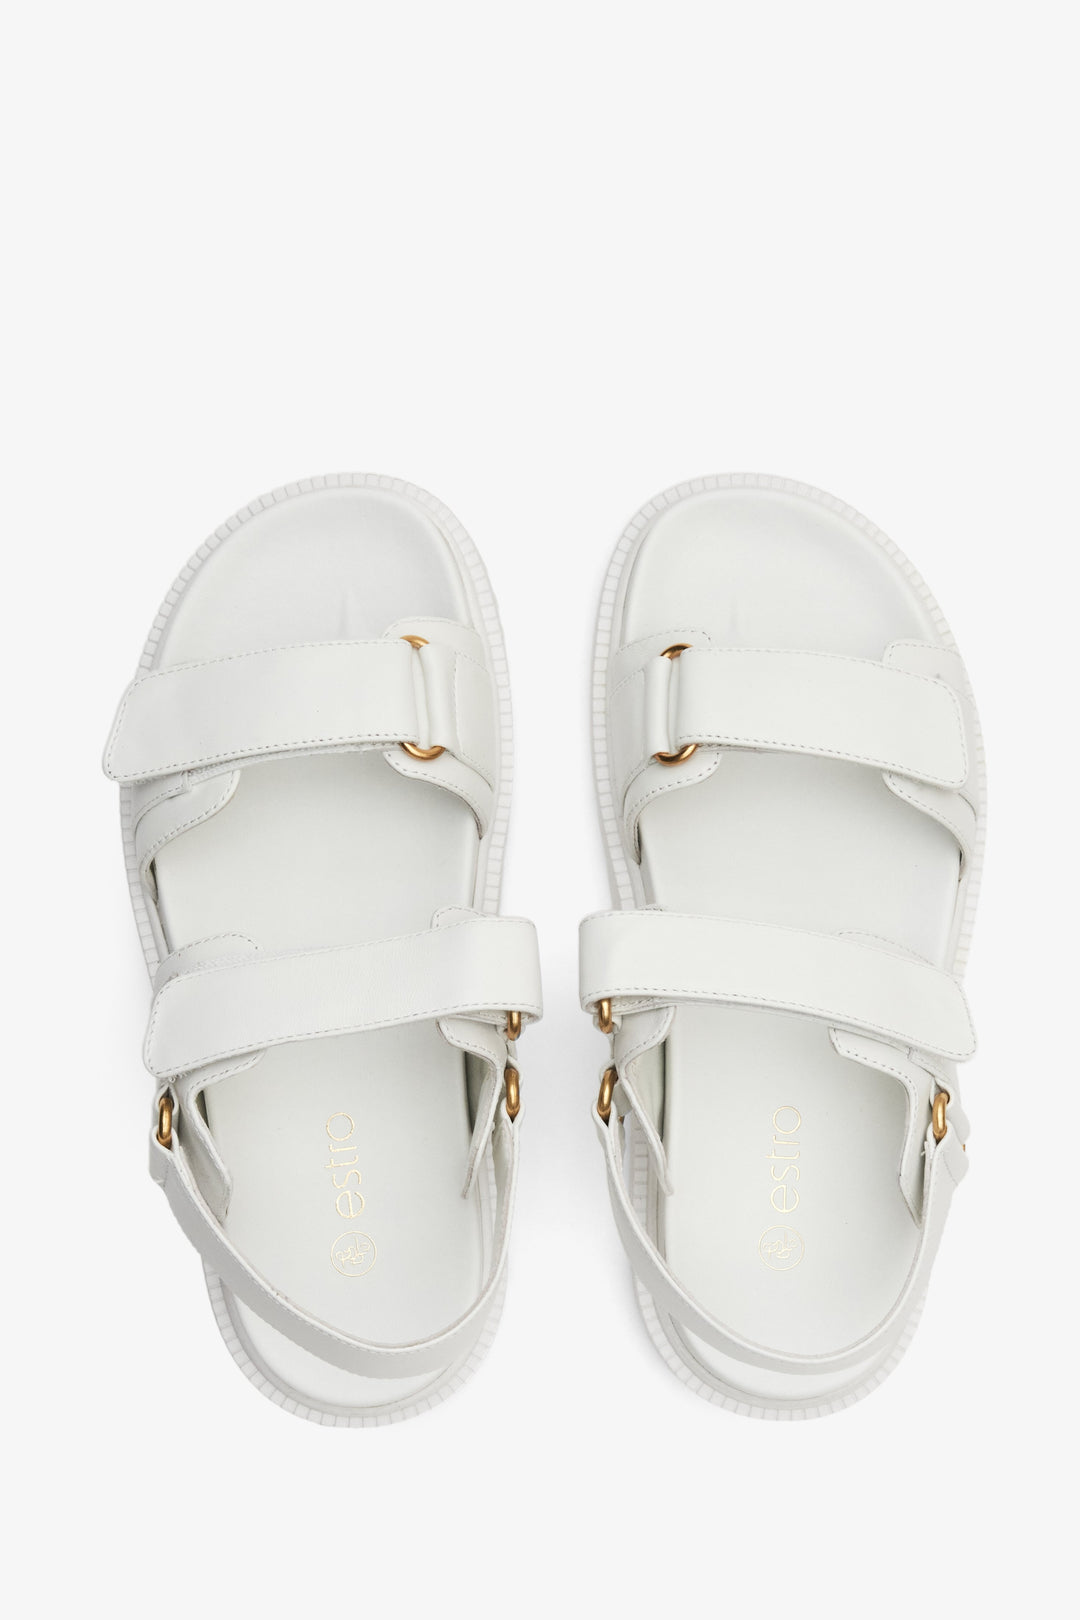 Women's white sandals made of genuine leather with a flexible sole and golden elements.